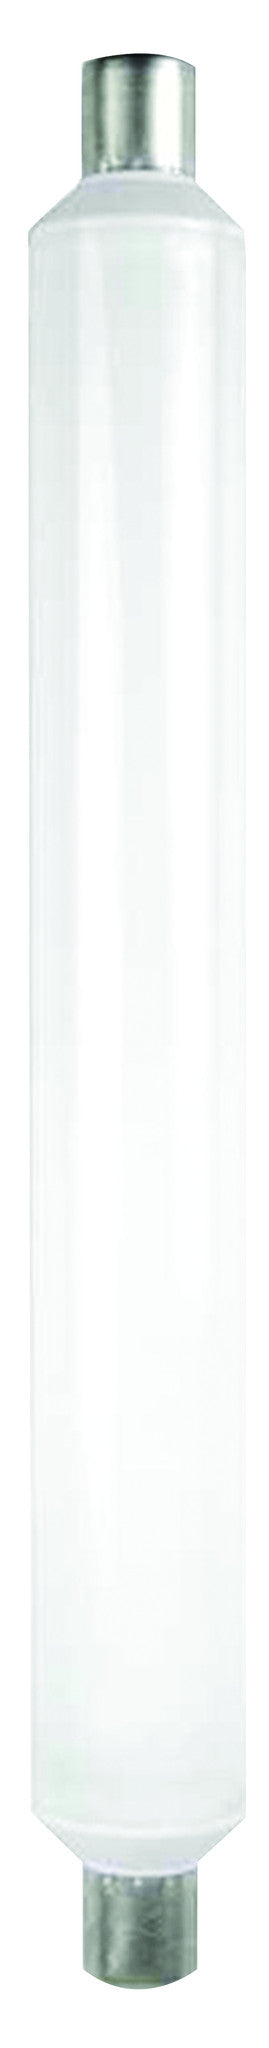 997107 - Tube Linolite LED S19 309mm 9W 2700K 700Lm GS TUBE The Lampco - The Lamp Company